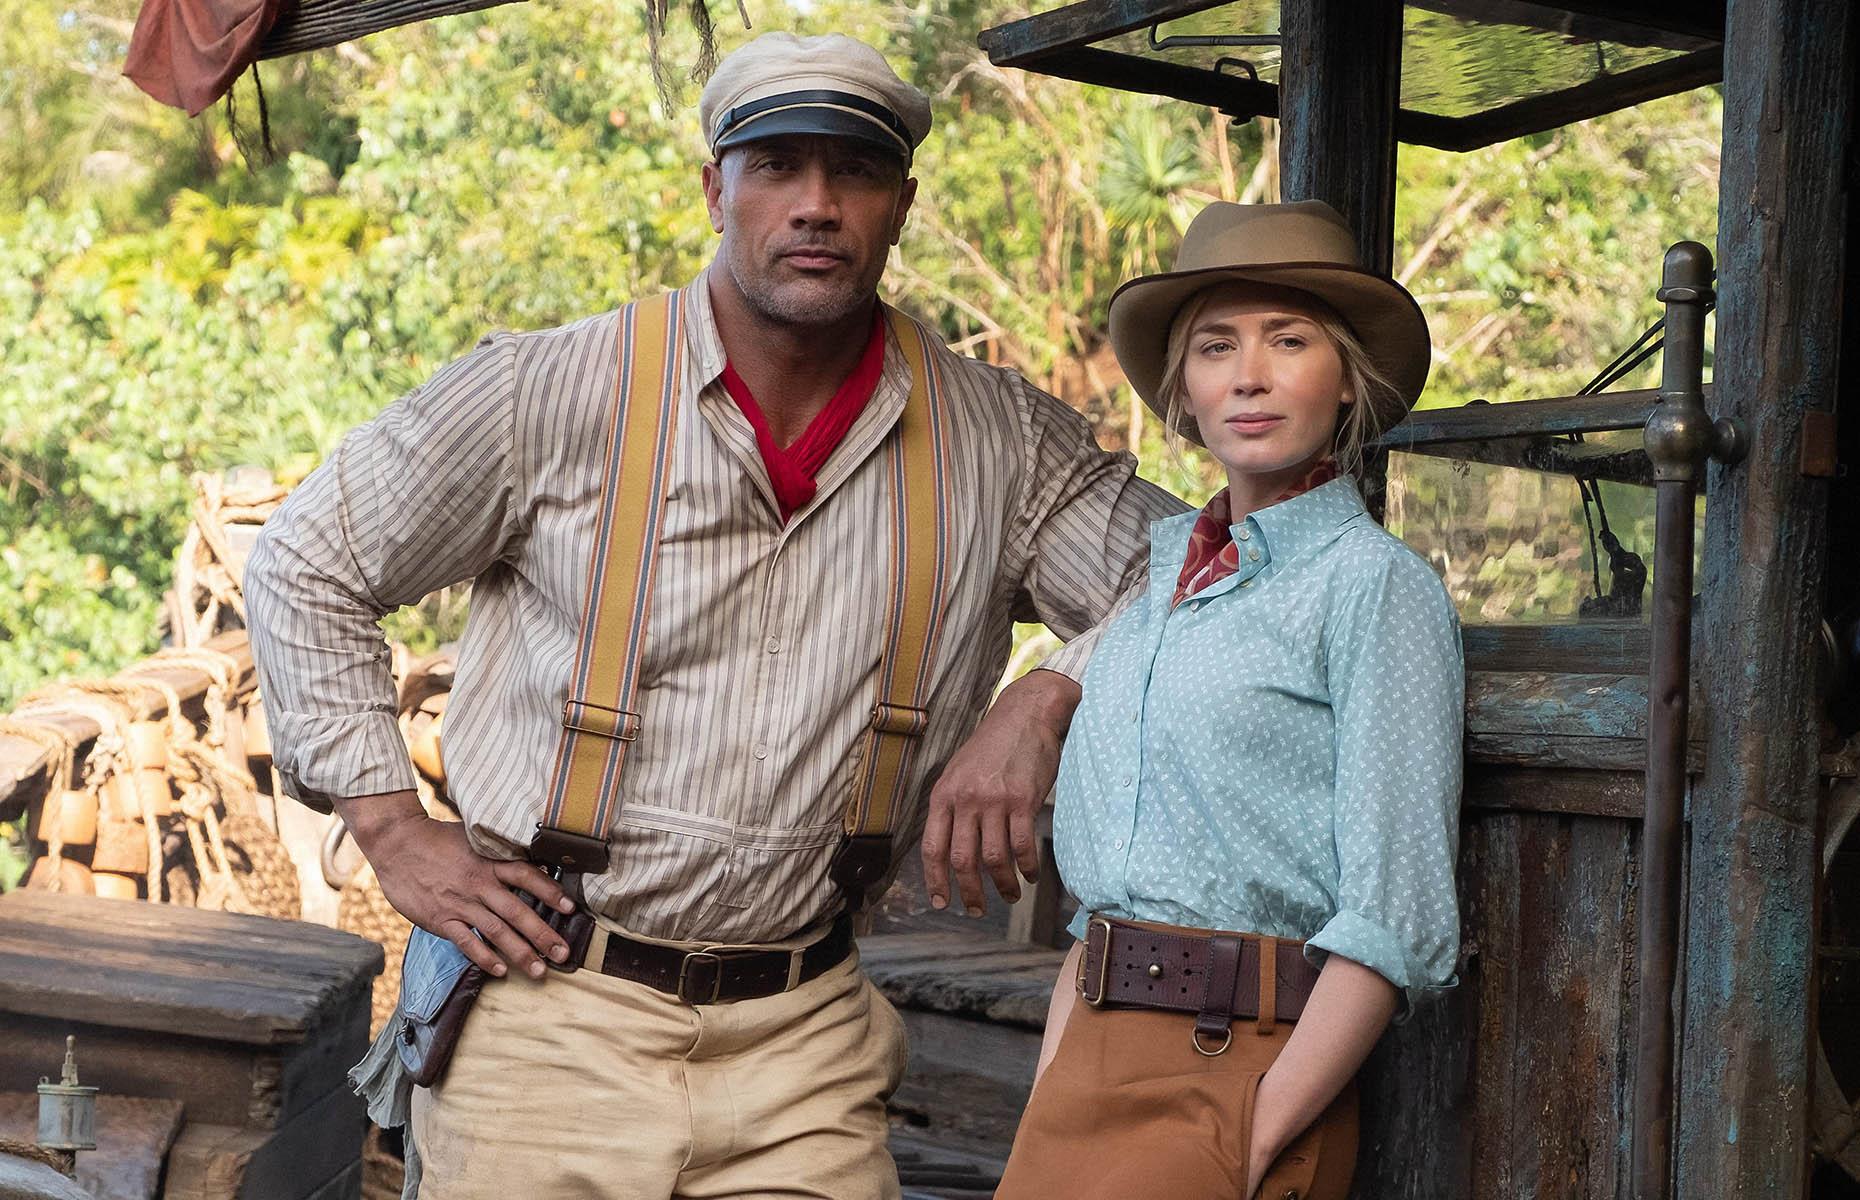 <p><em>Jungle Cruise </em>had all the necessary ingredients to be the next big blockbuster. Based on a beloved Disney World theme park ride, it boasted the star power of Dwayne Johnson and Emily Blunt and had a hefty $200 million budget behind it. </p>  <p>Despite high expectations, the action-packed adventure saga performed poorly at the box office, earning just $220 million globally. </p>  <p>The pandemic was once again cited as a reason for its failure, while Disney's strategy of releasing movies straight to streaming shortly after a cinematic release is also believed to have played a role. Instead of opting to buy a movie ticket, audiences were willing to wait a few extra weeks to watch the film at home.</p>  <p>The film is reported to have lost Disney around $151 million. </p>